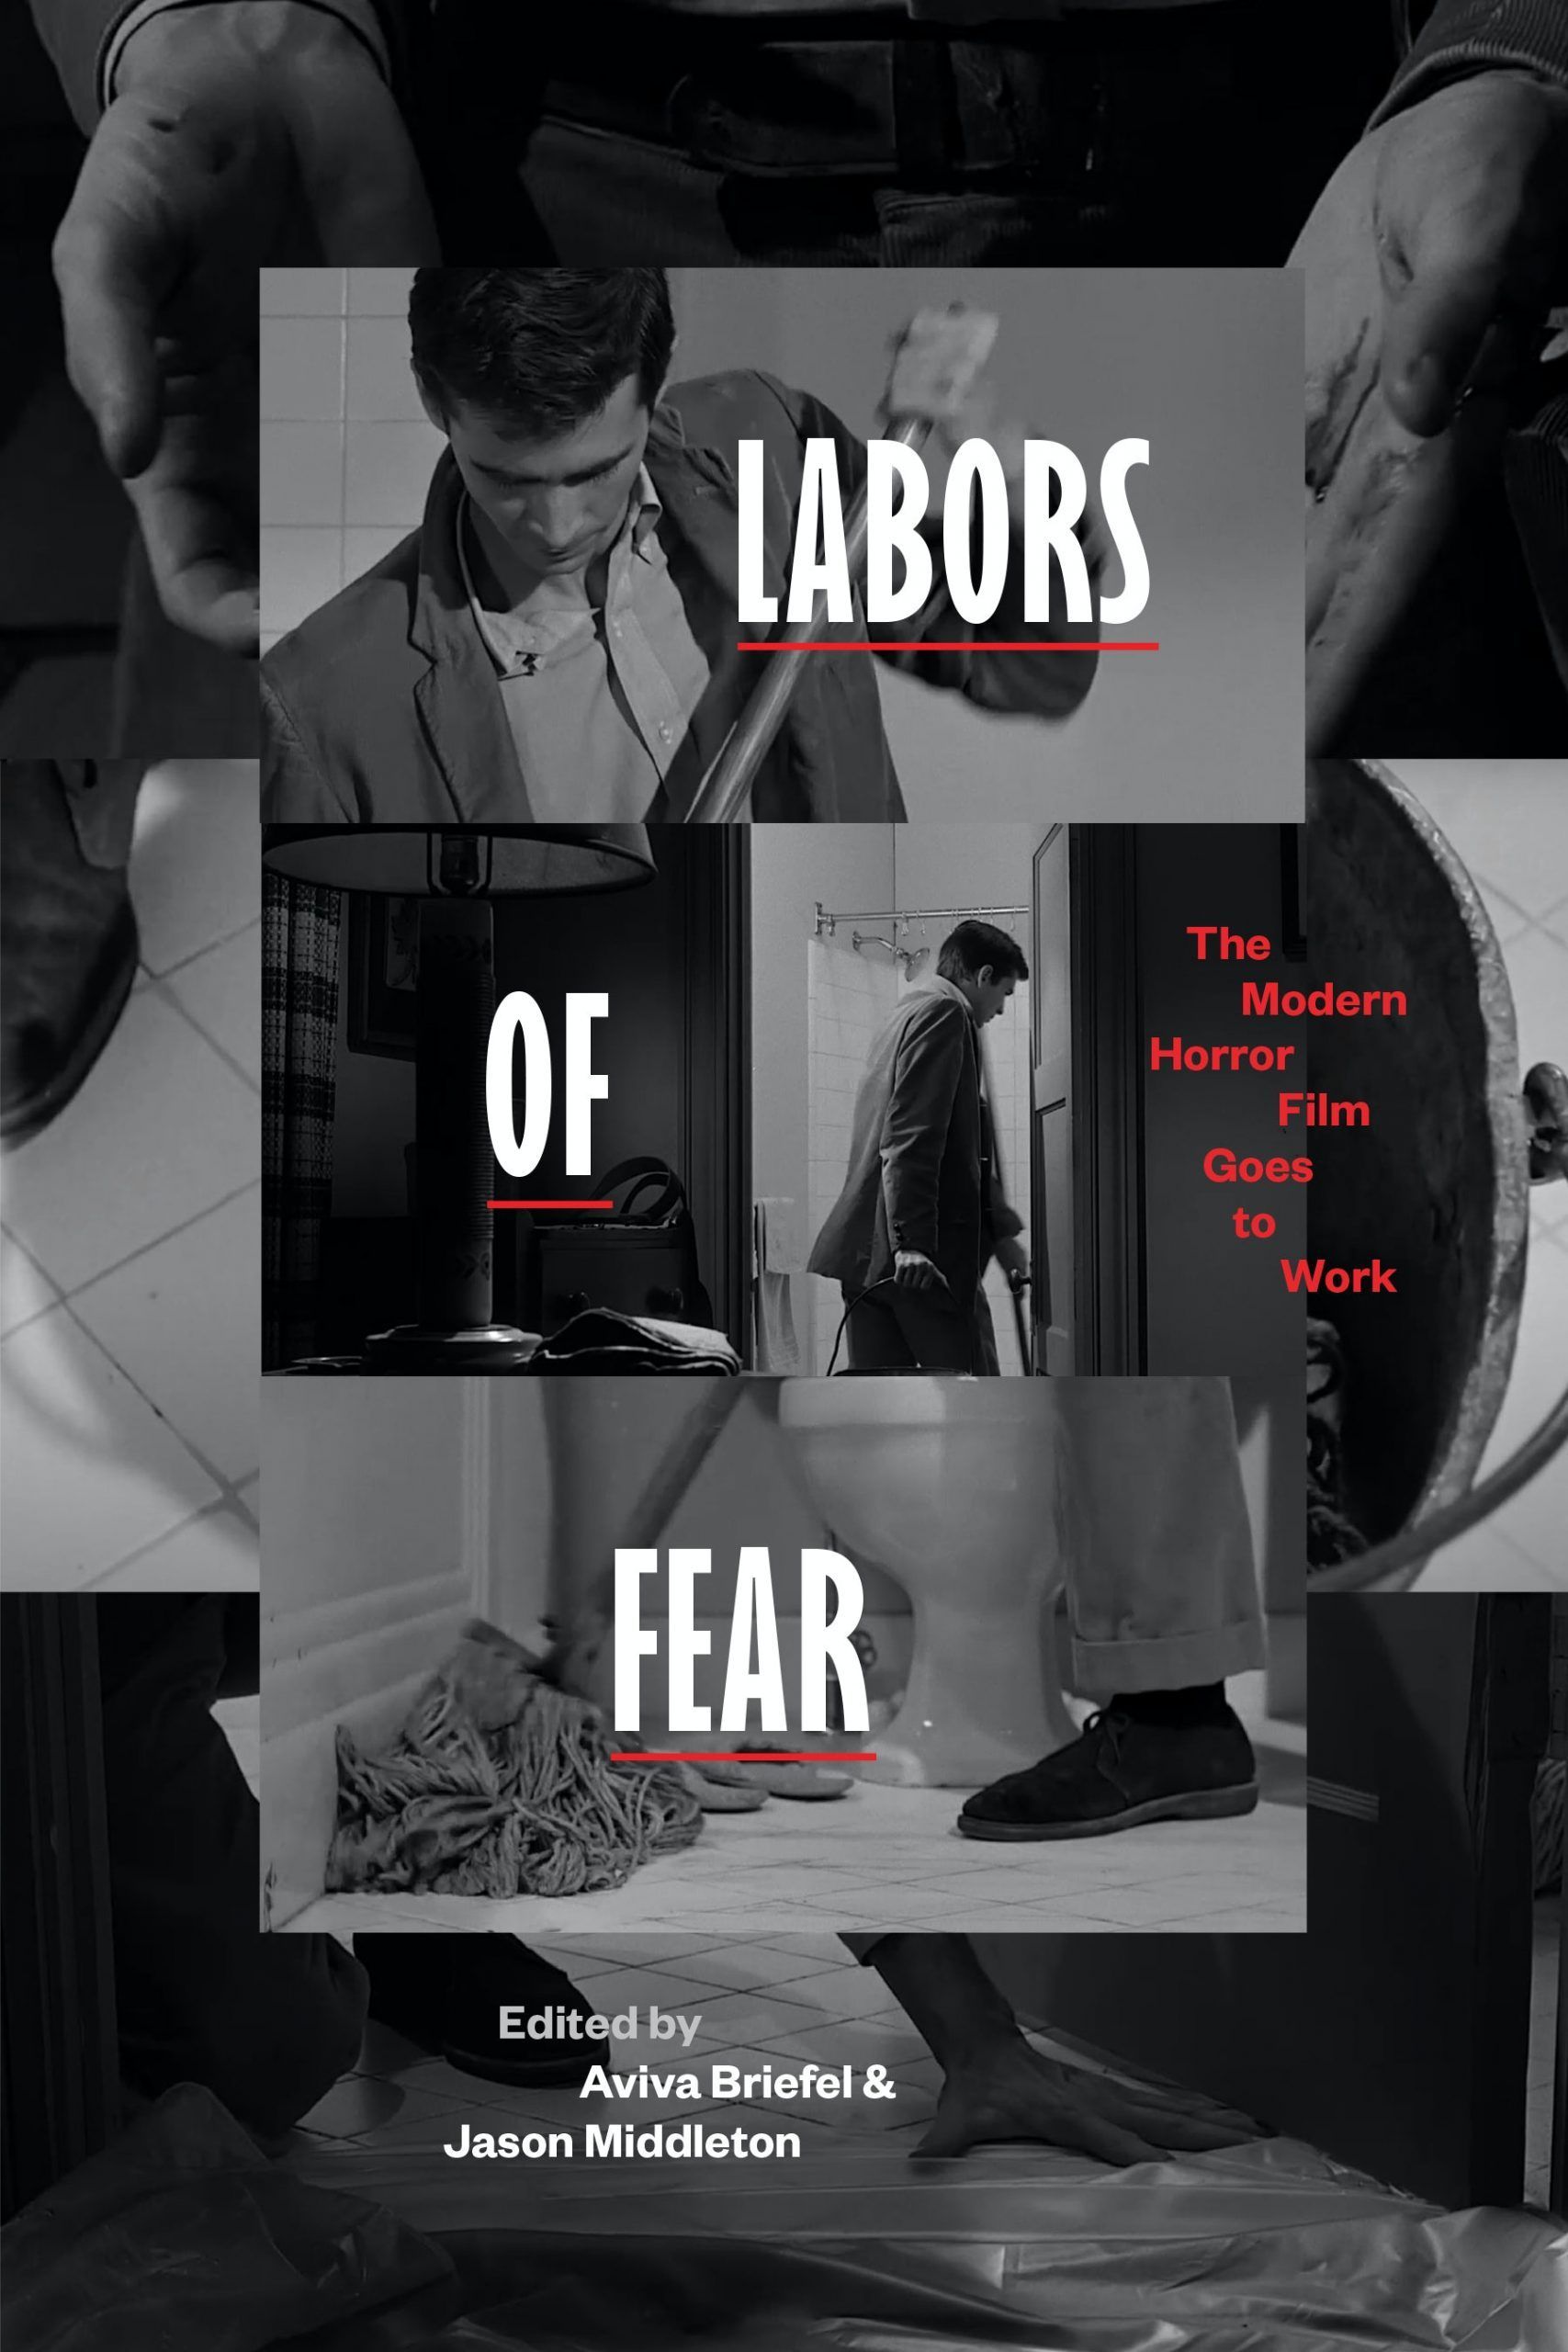 Can We Imagine Better Work? On Aviva Briefel and Jason Middleton’s “Labors of Fear”